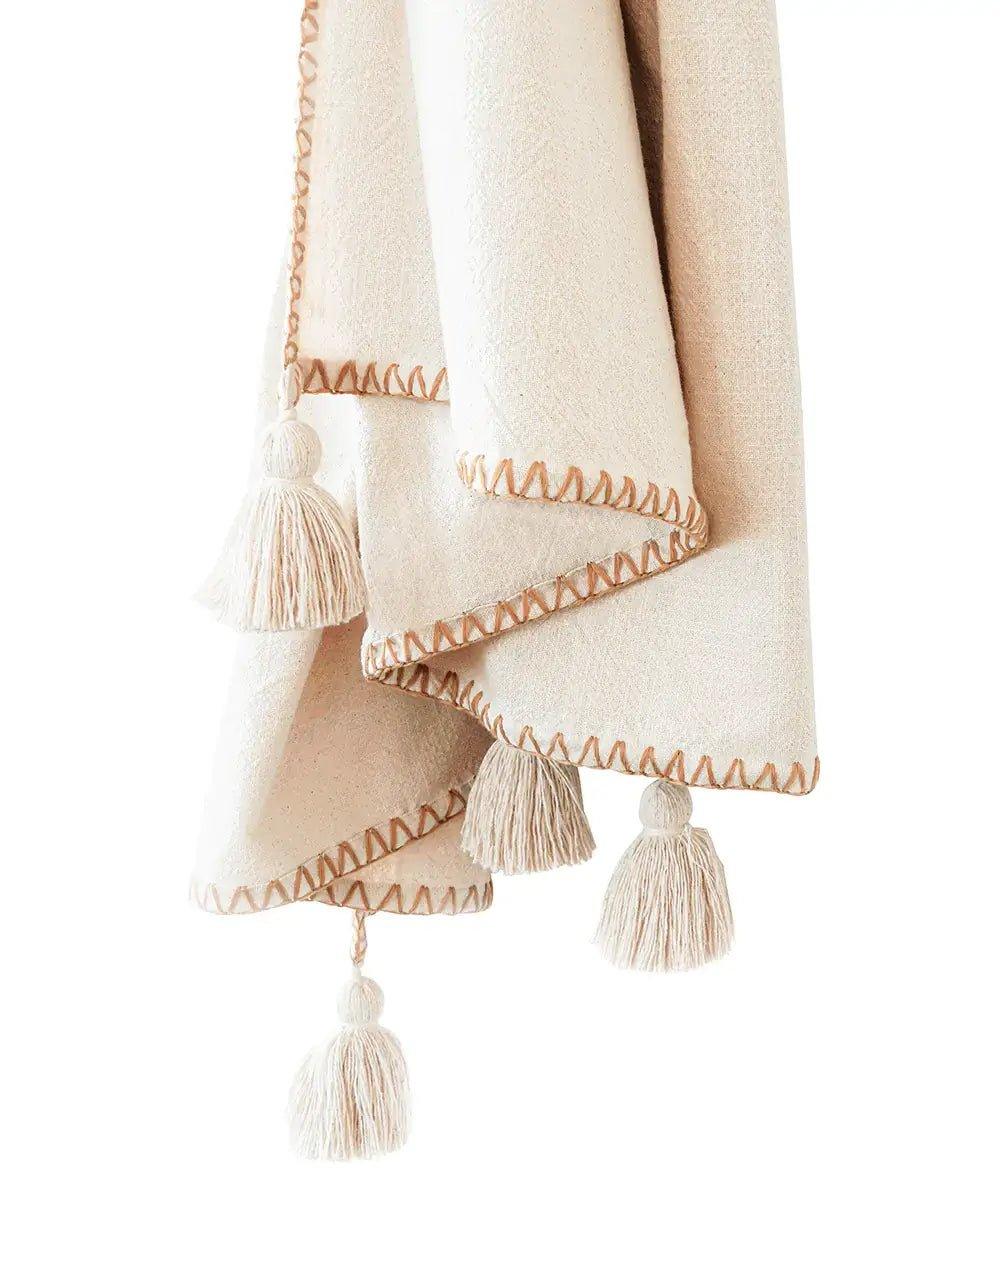 Blanket Stitch Throw with Tassels - Nature Home Decor